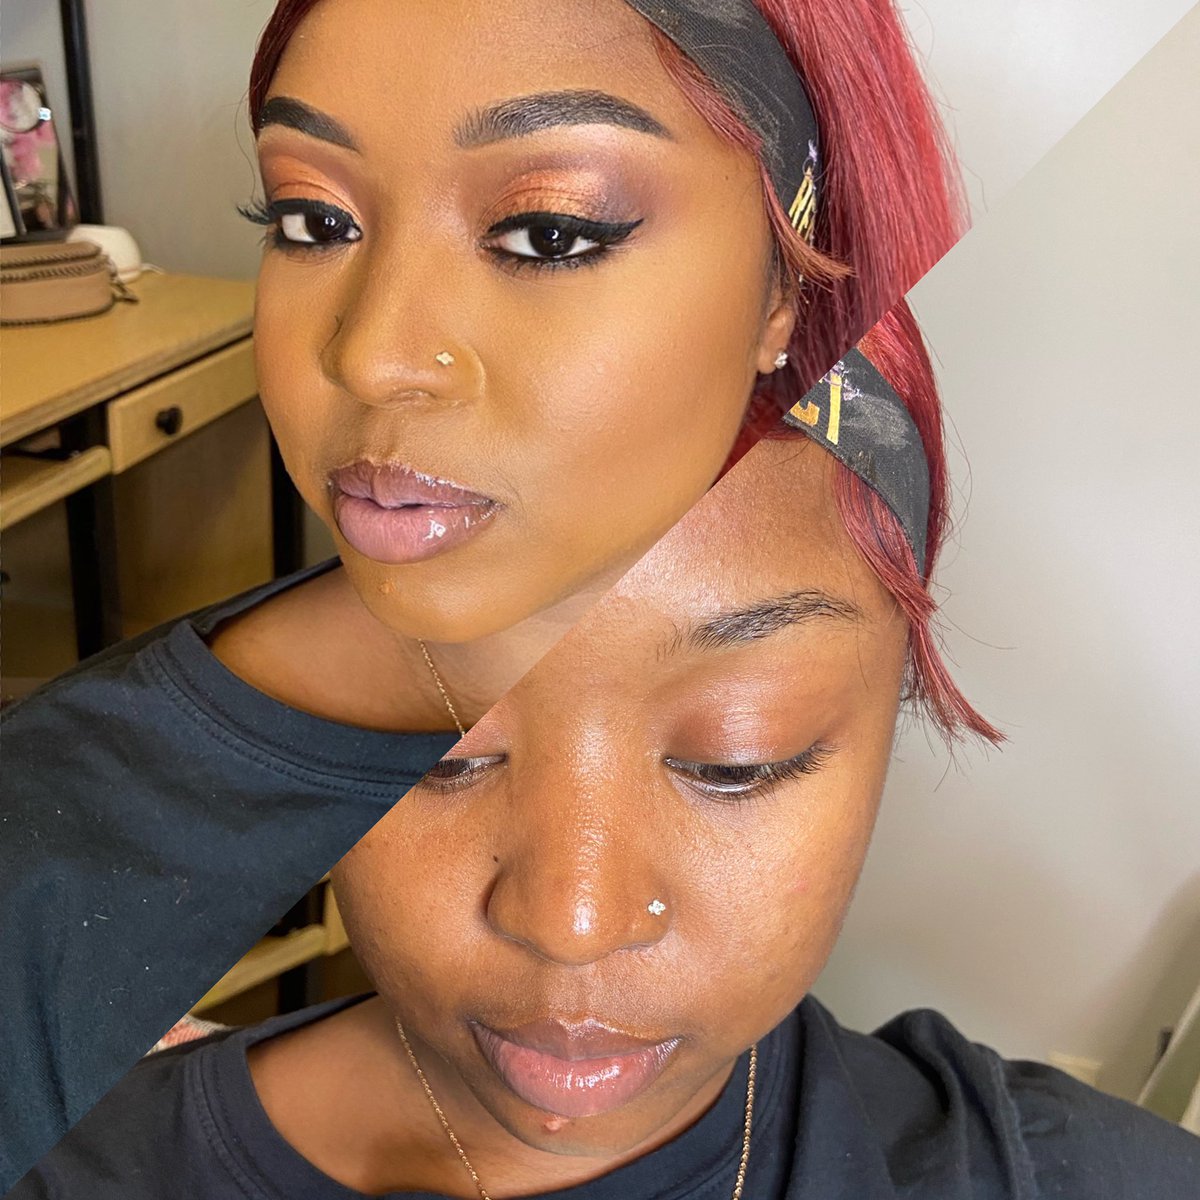 I've been perfecting my craft as an upcoming makeup artist! And I am now taking faces in Atlanta! I am located near Stockbridge/Conyers area! A simple repost & follow can start up my clientele 

Dm or comment if interested !
#atlantamua #atlantamakeupartist